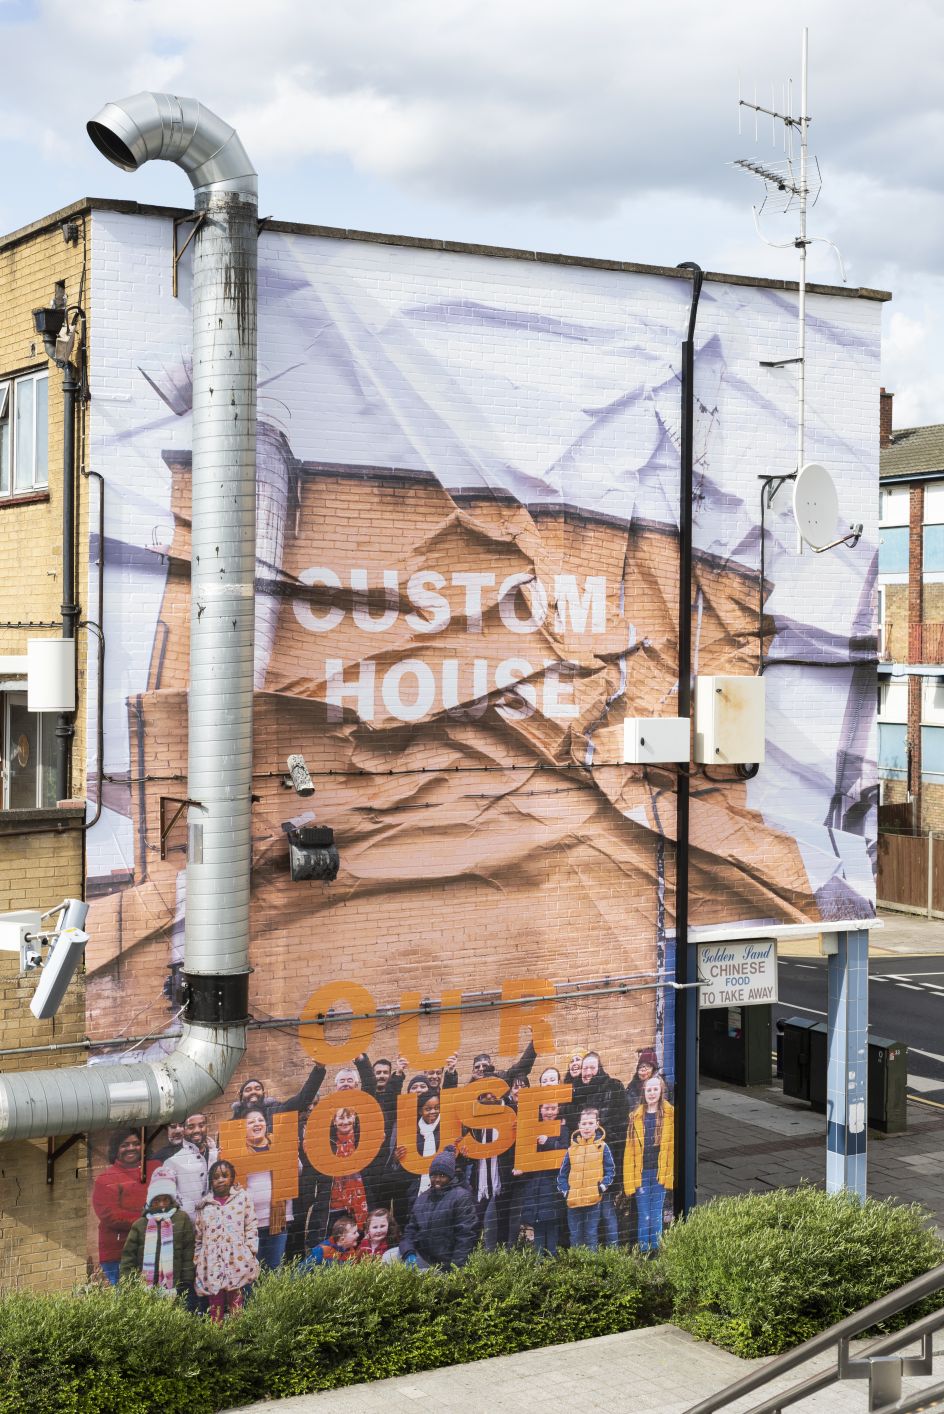 Custom House Is Our House, 2019, Jessie Brennan (Part of the year-long series Making Space) Commissioned by the Royal Docks Team, a joint initiative by the Mayor of London and the Mayor of Newham. Produced and curated by UP Projects.  Photo by Thierry Bal